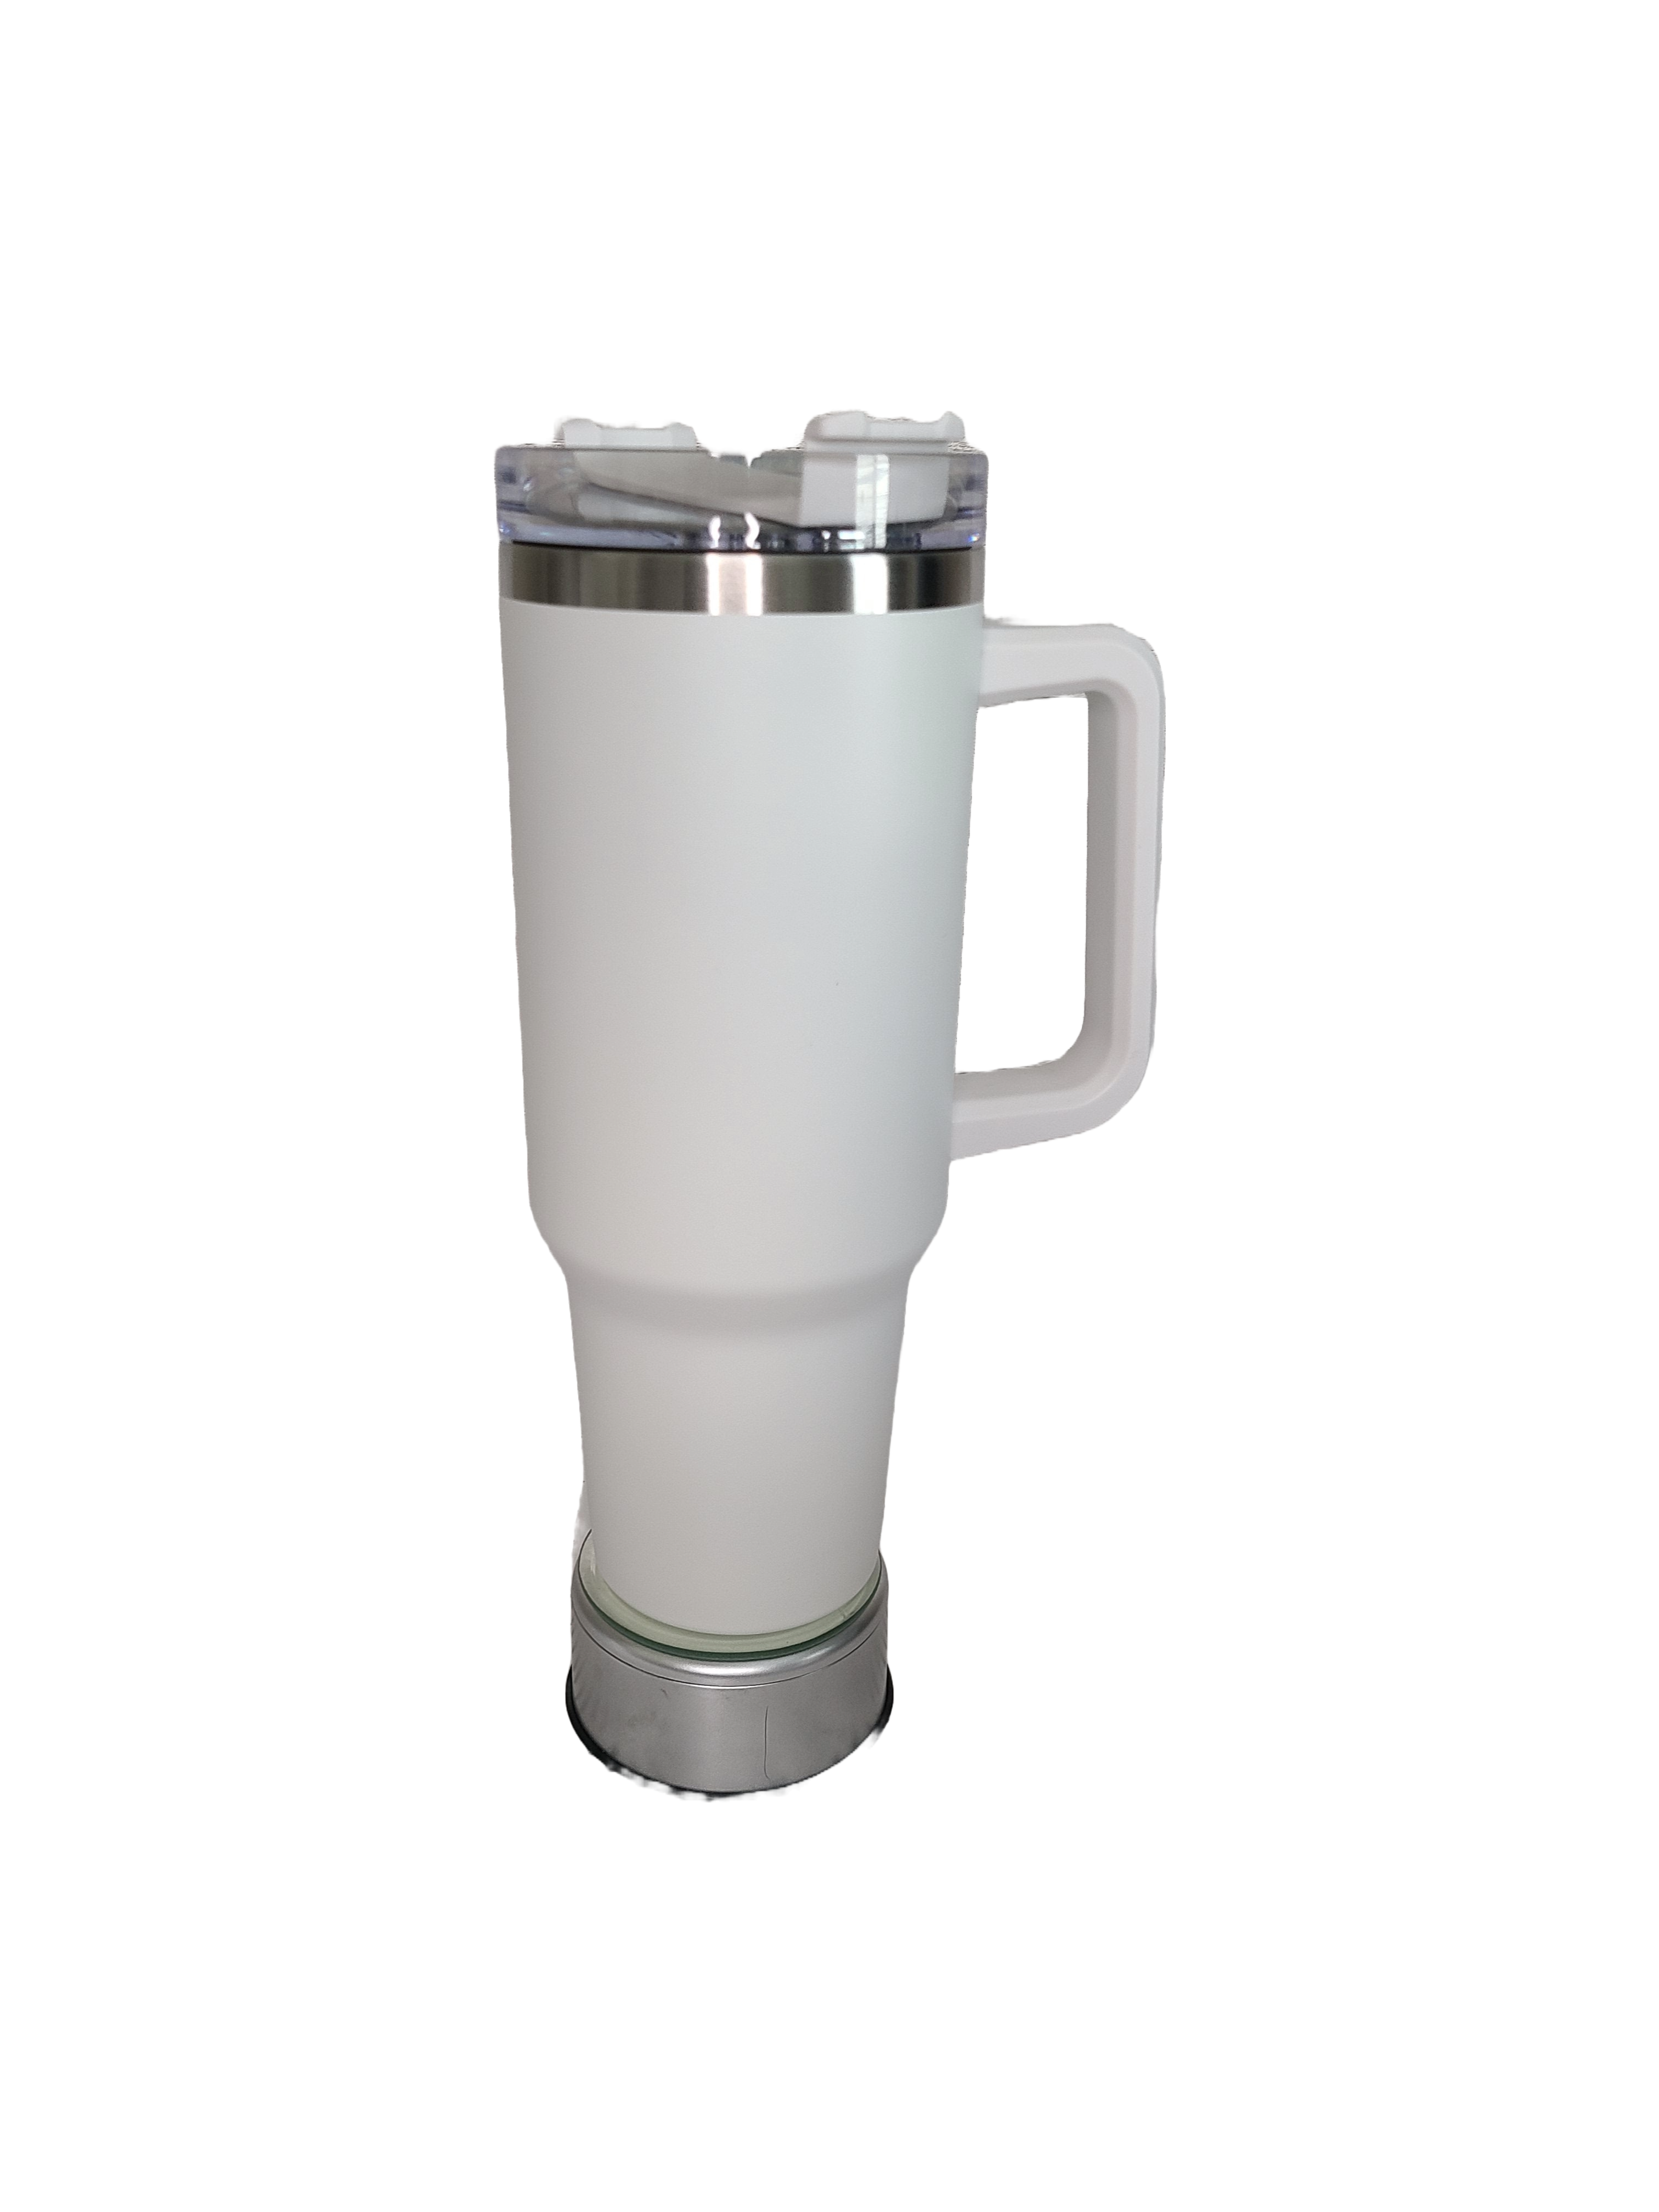 40 oz Stainless Steel Tumbler with Handle-"We the People, Freedom"